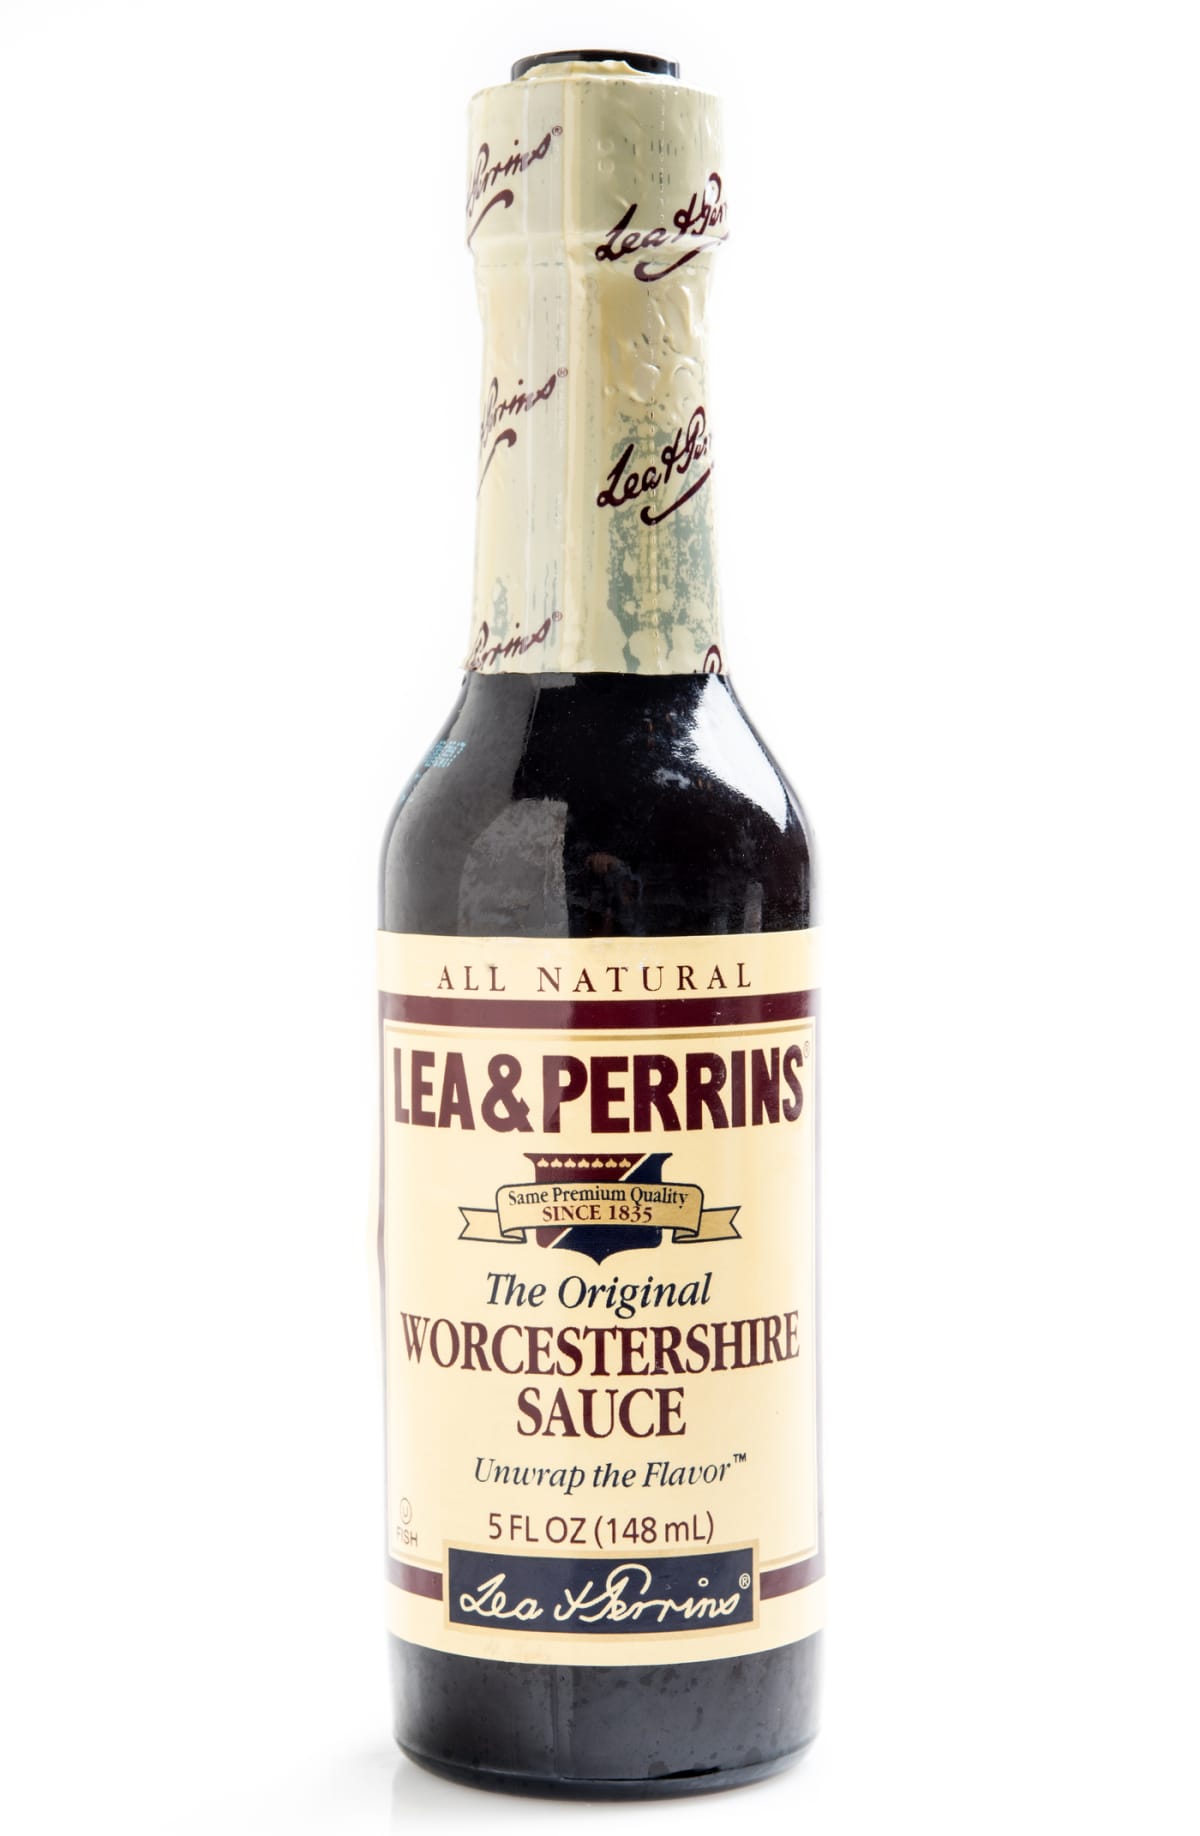 A bottle of Worcestershire sauce against a white background.